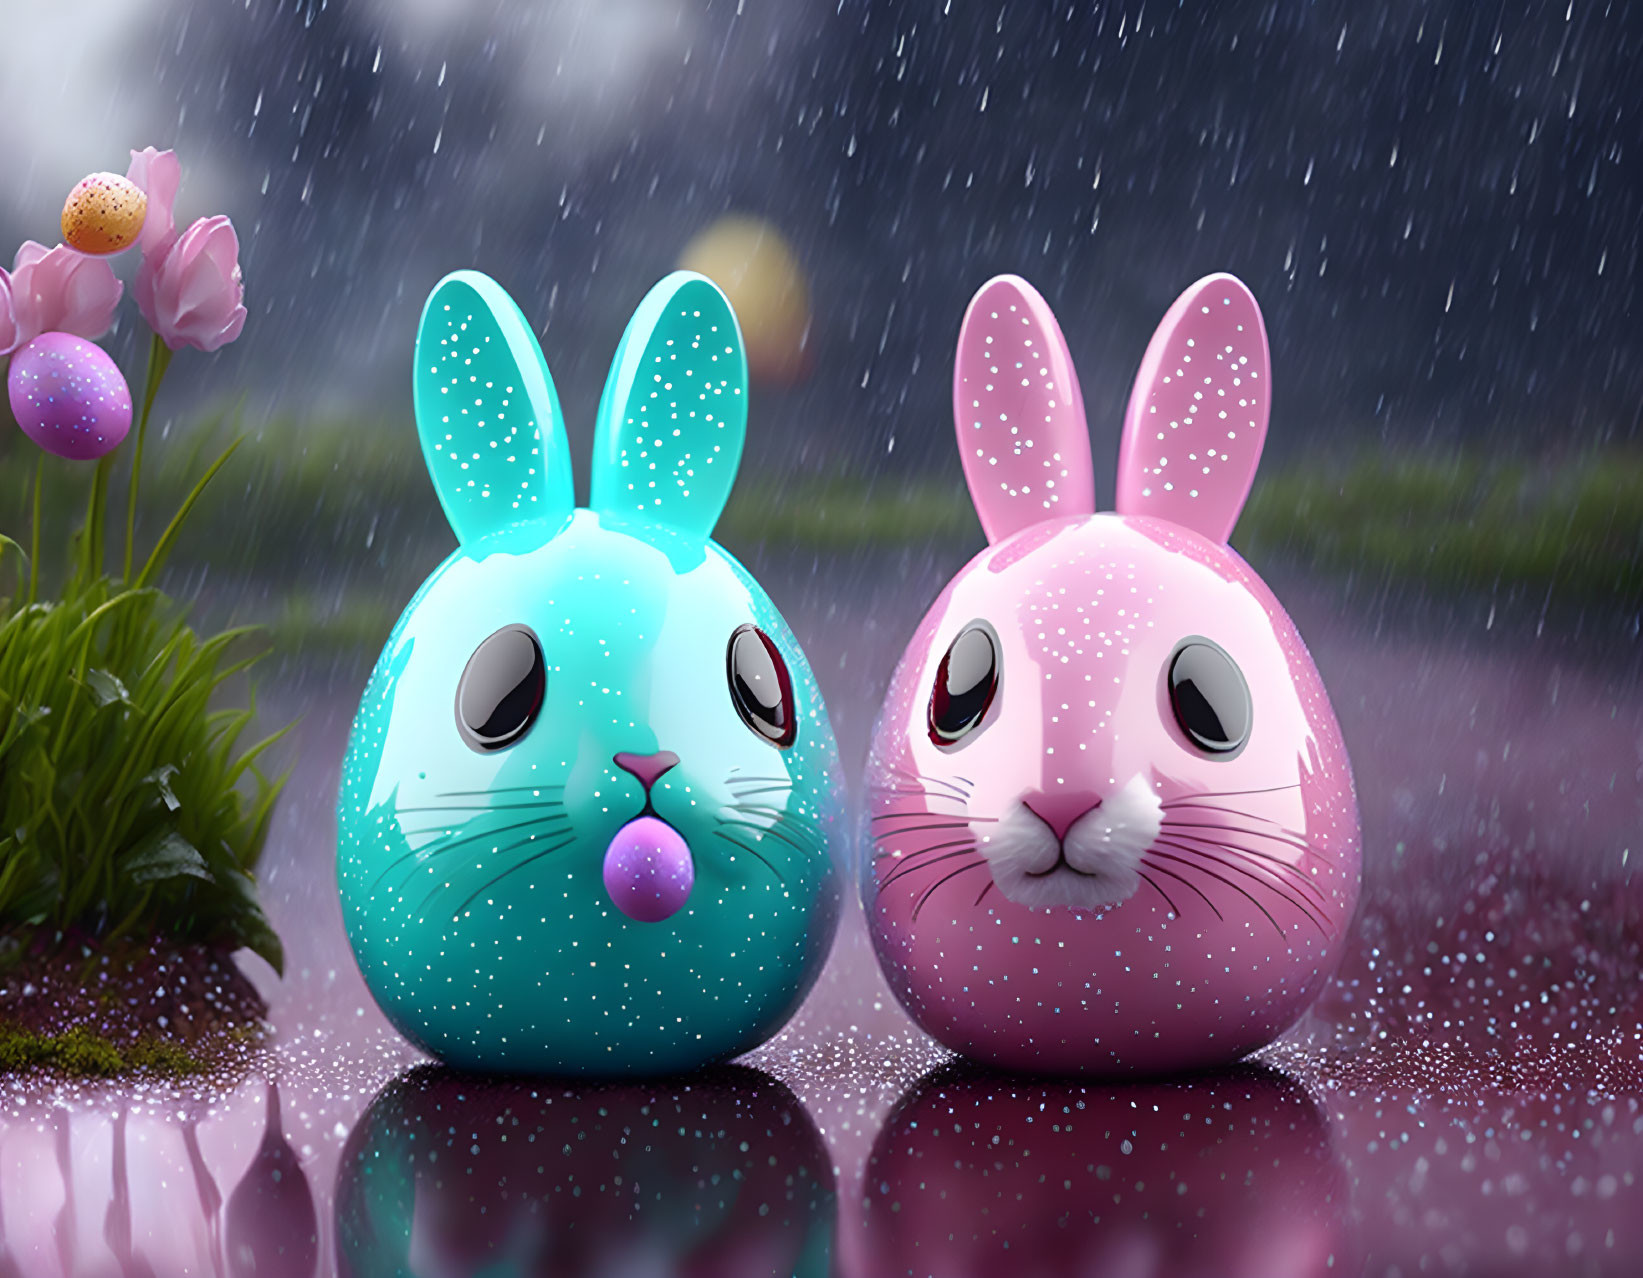 Cartoon-Style Bunny Figurines in Blue and Pink Rainy Scene